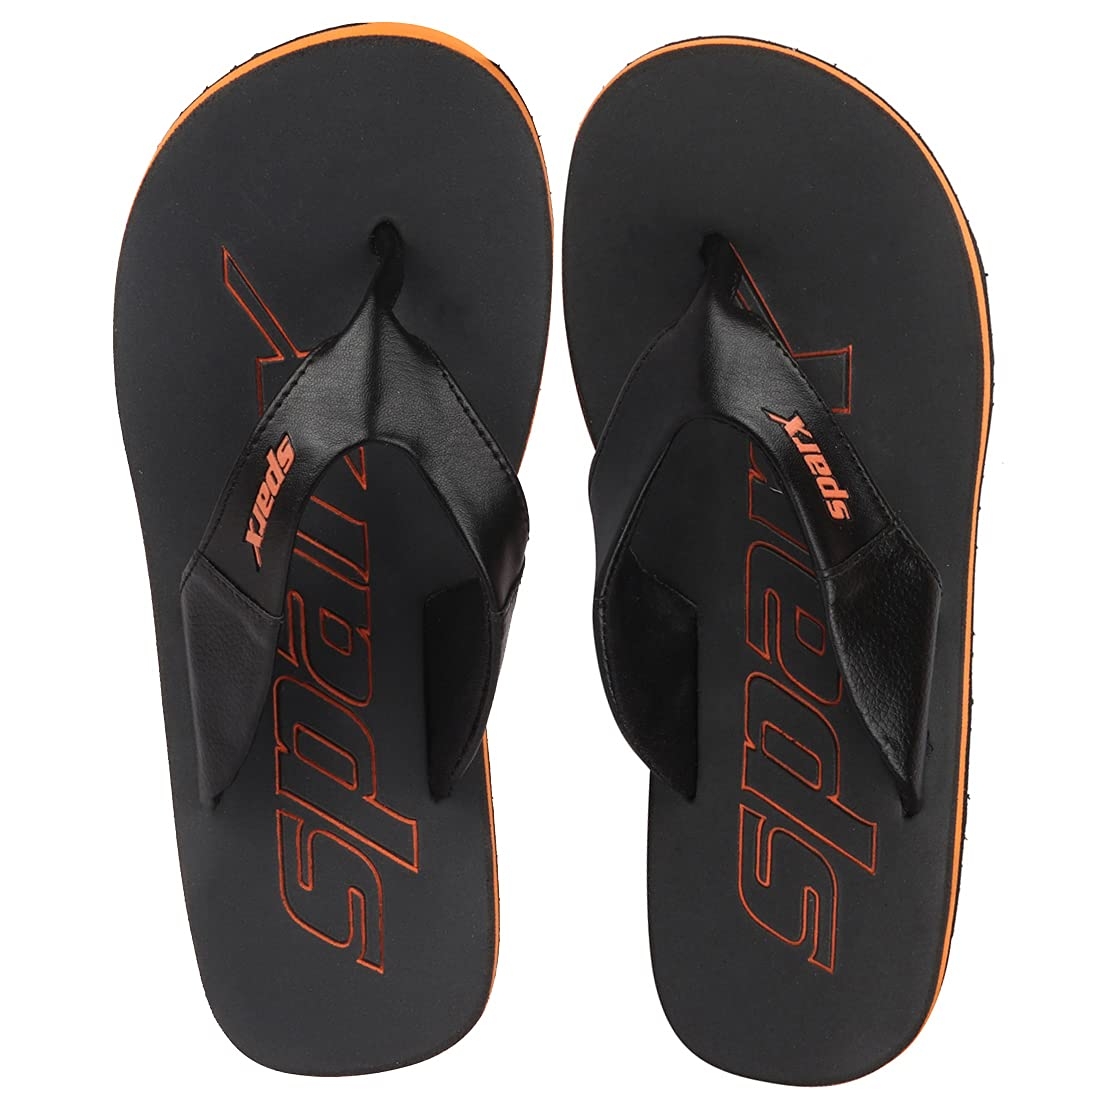 Sparx Slippers at Rs 145/pair | Men Slippers in Delhi | ID: 22065881133-saigonsouth.com.vn